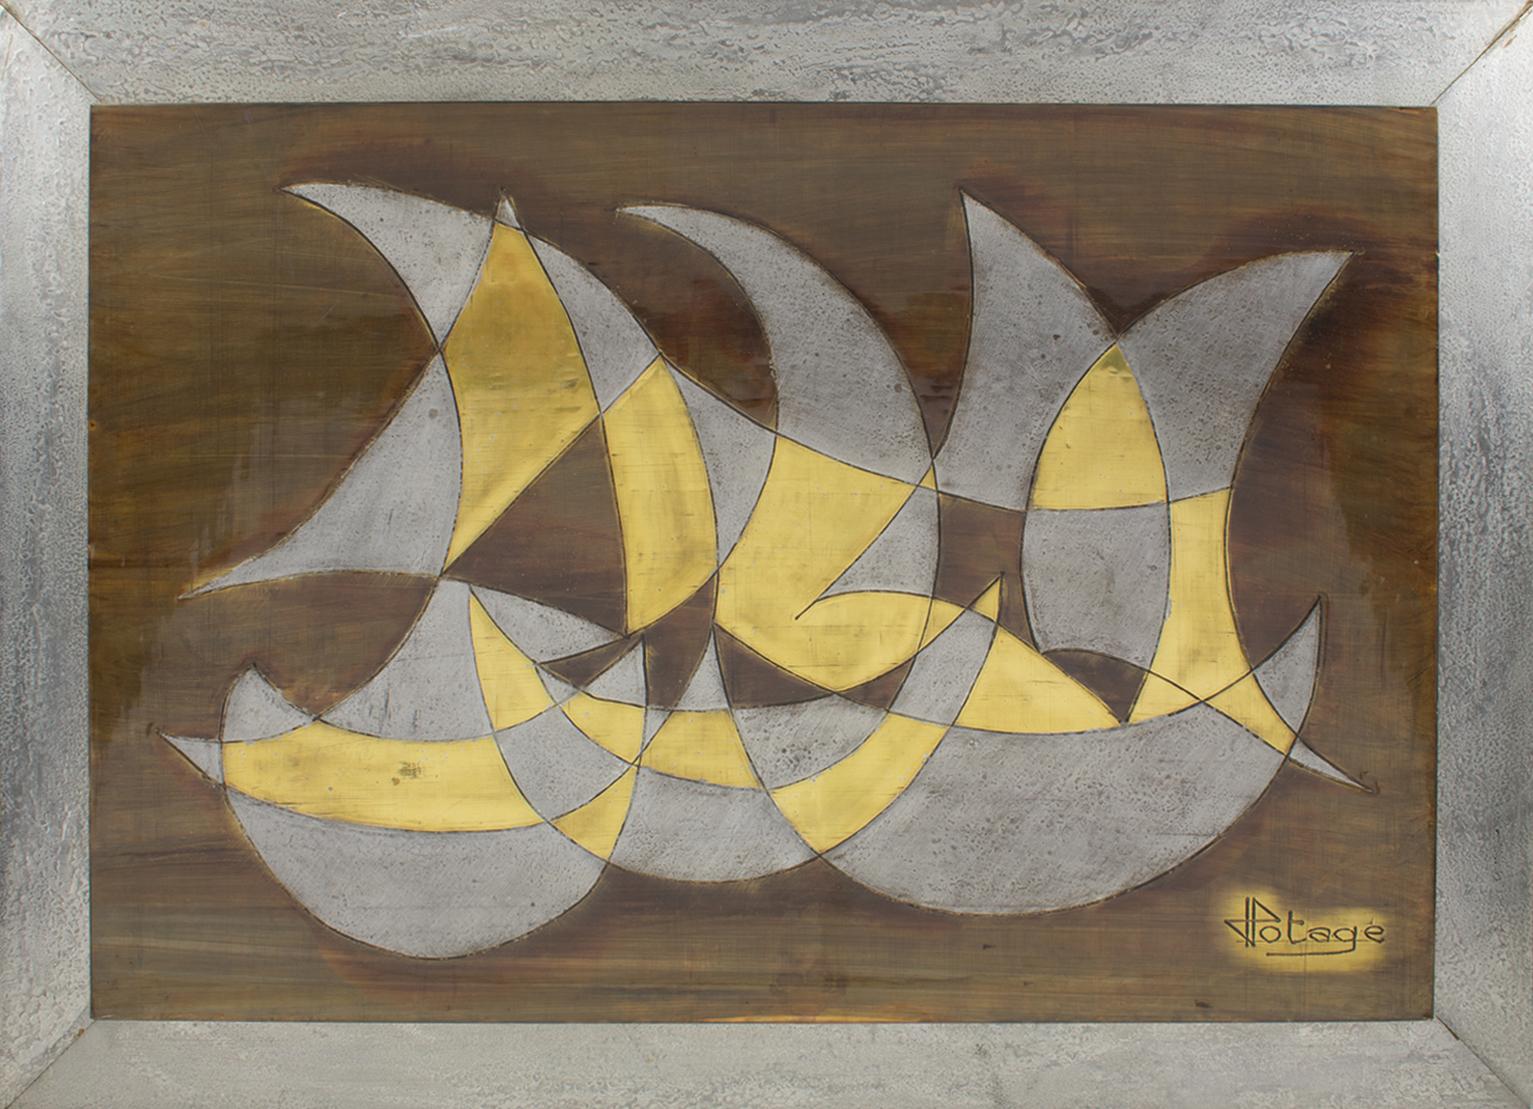 Stunning handcrafted French brutalist metal wall art sculpture panel by Jacques Potage (1931 -). Mounted on a wood plank covered with textured pewter, the metal panel features a stylized set of sailboats in abstract mixed metal modernist-inspired